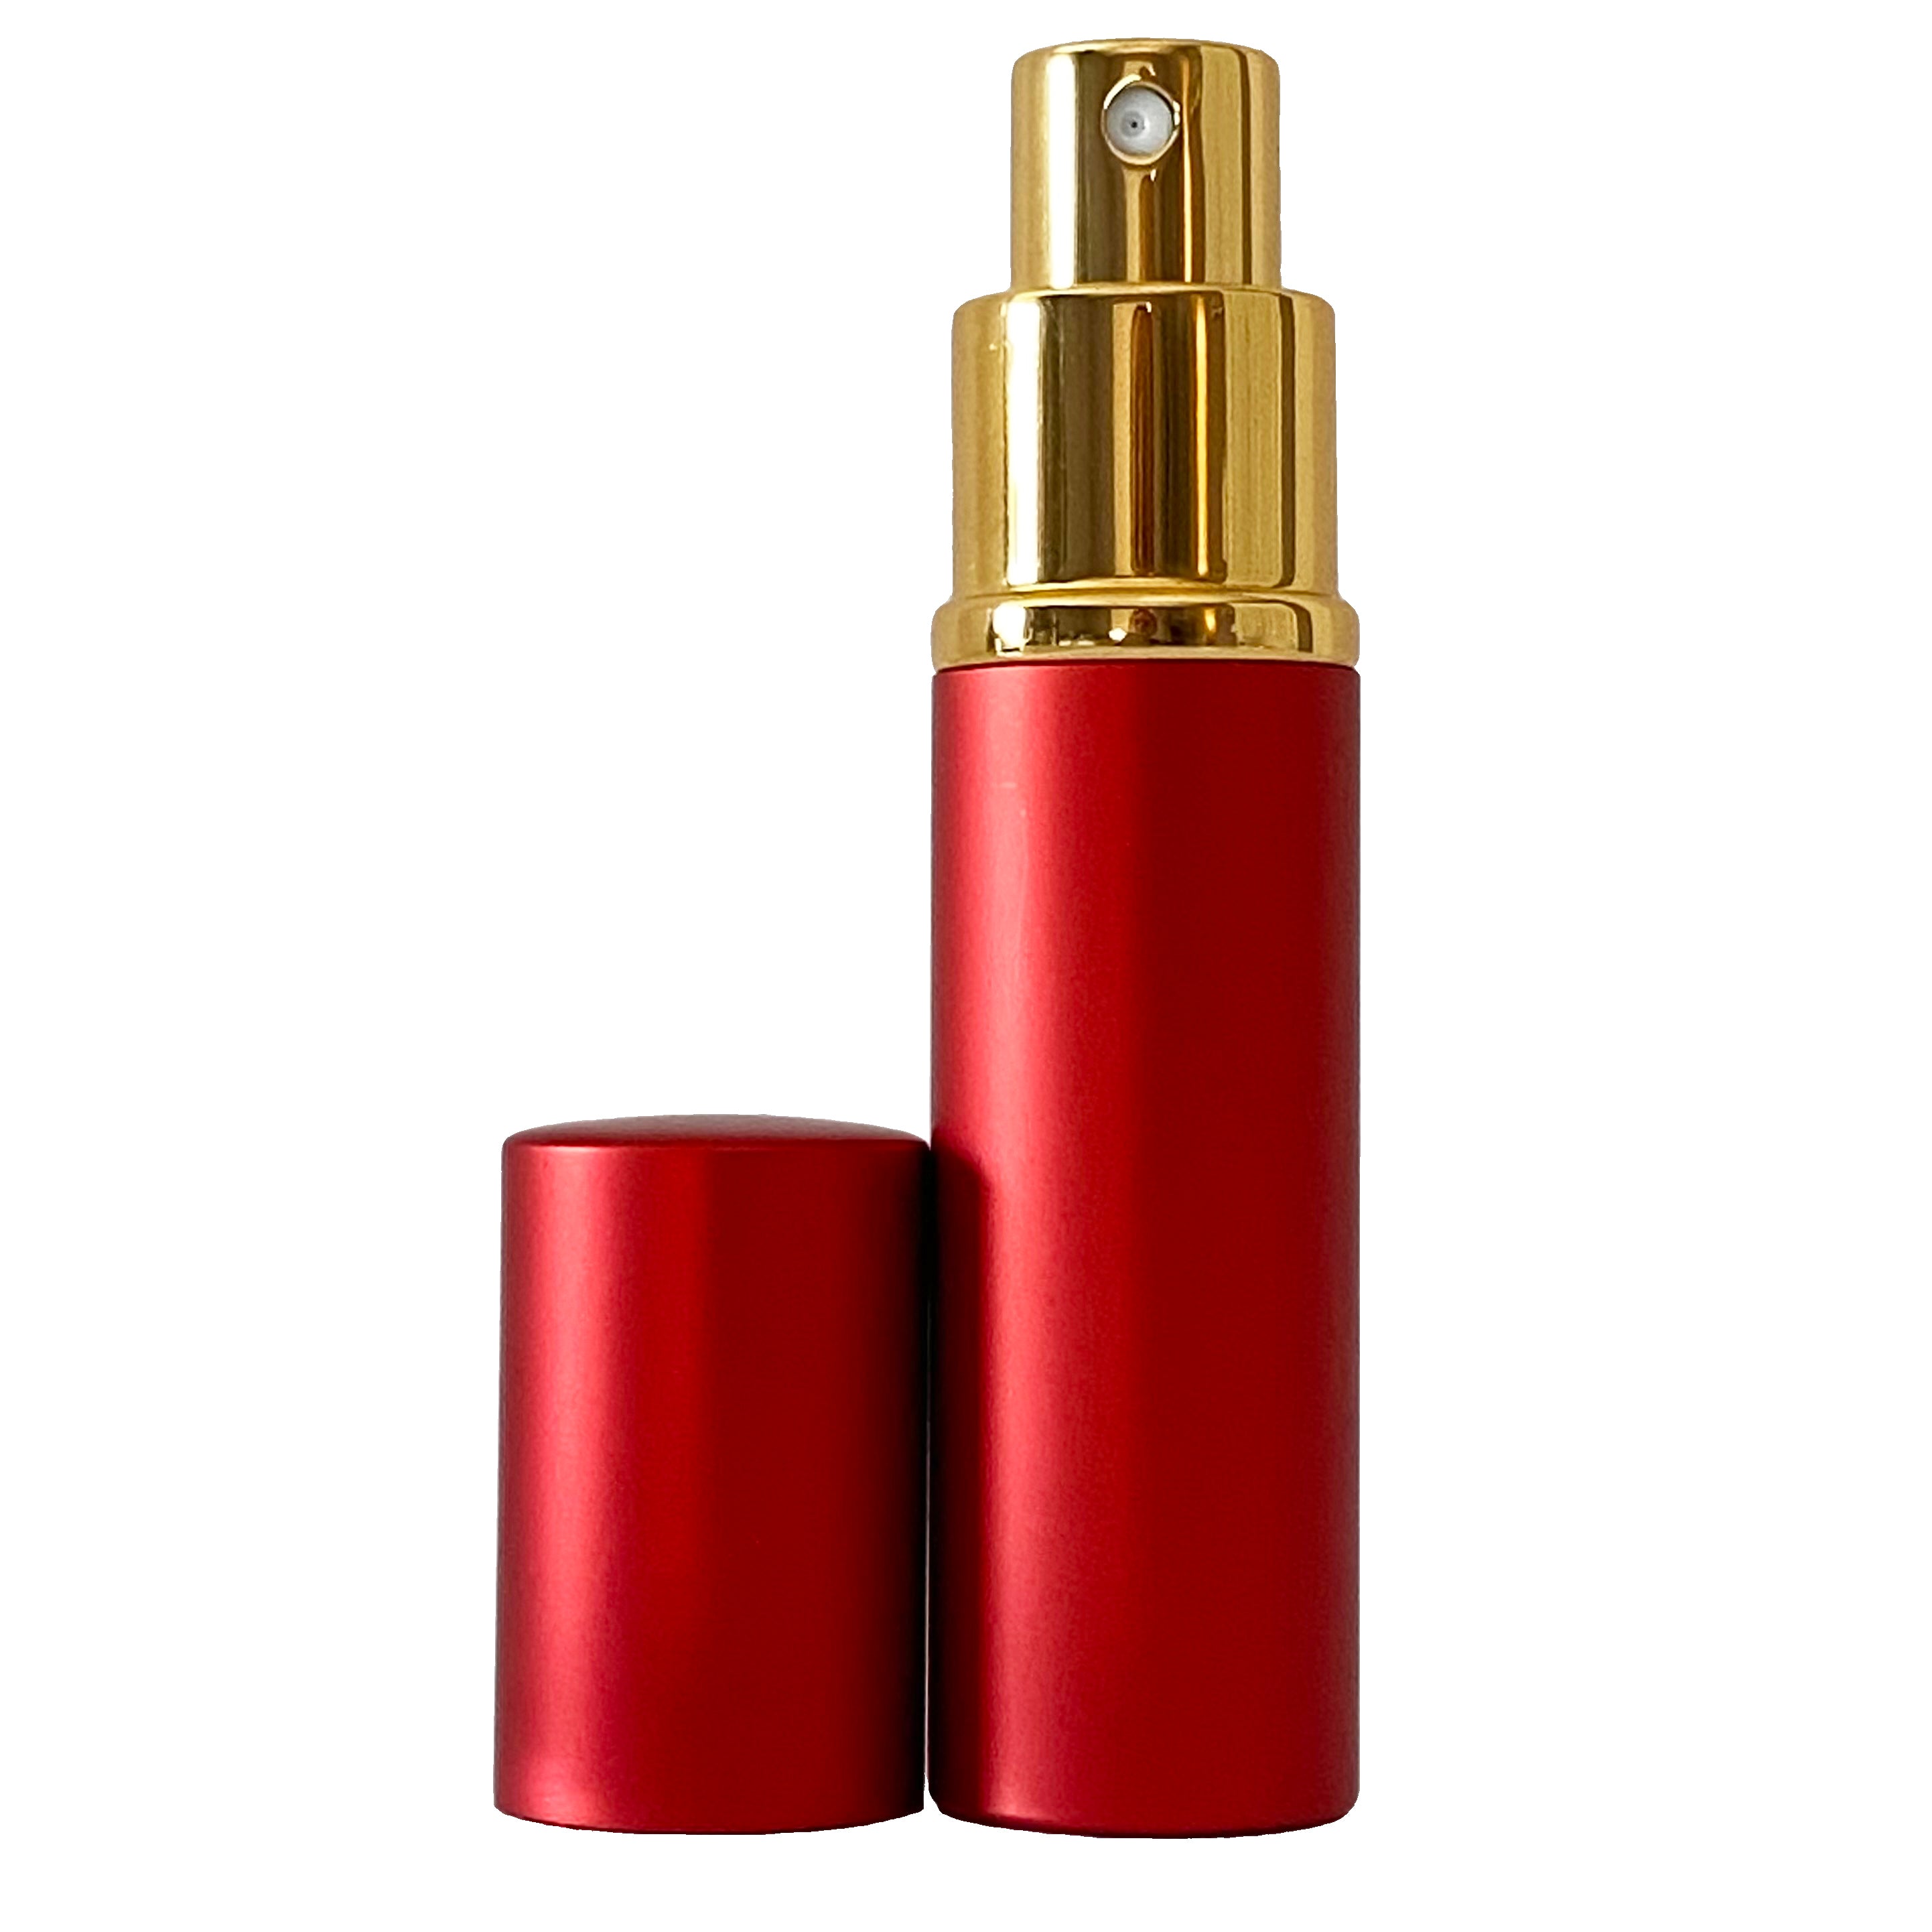 10ml 0.33oz Red Perfume Glass Spray Deluxe Bottles Gold Atomizers